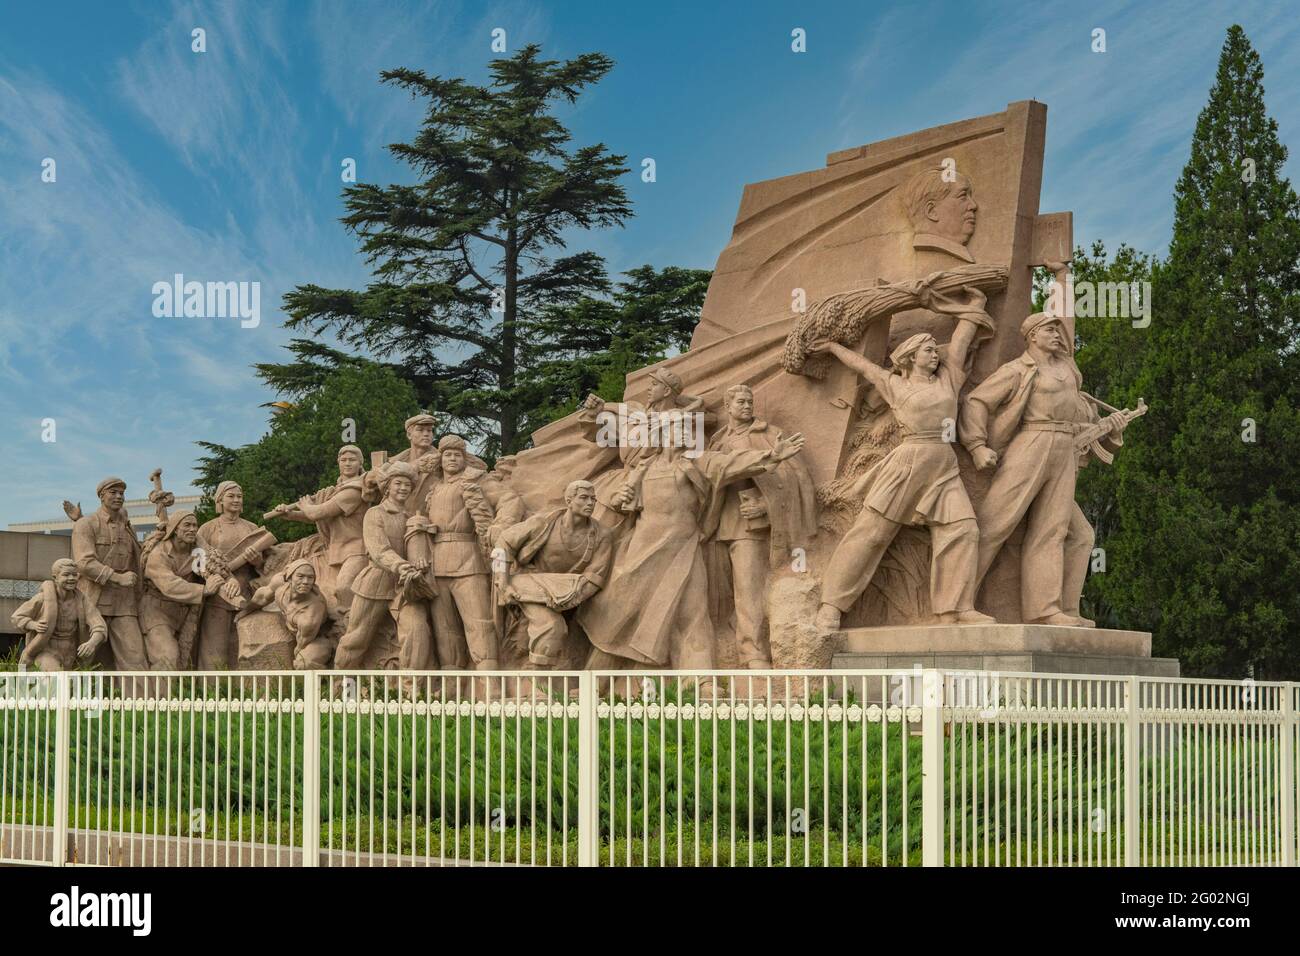 Freedom Fighters' Monument in Tiananmen Square, Beijing, China Stock Photo